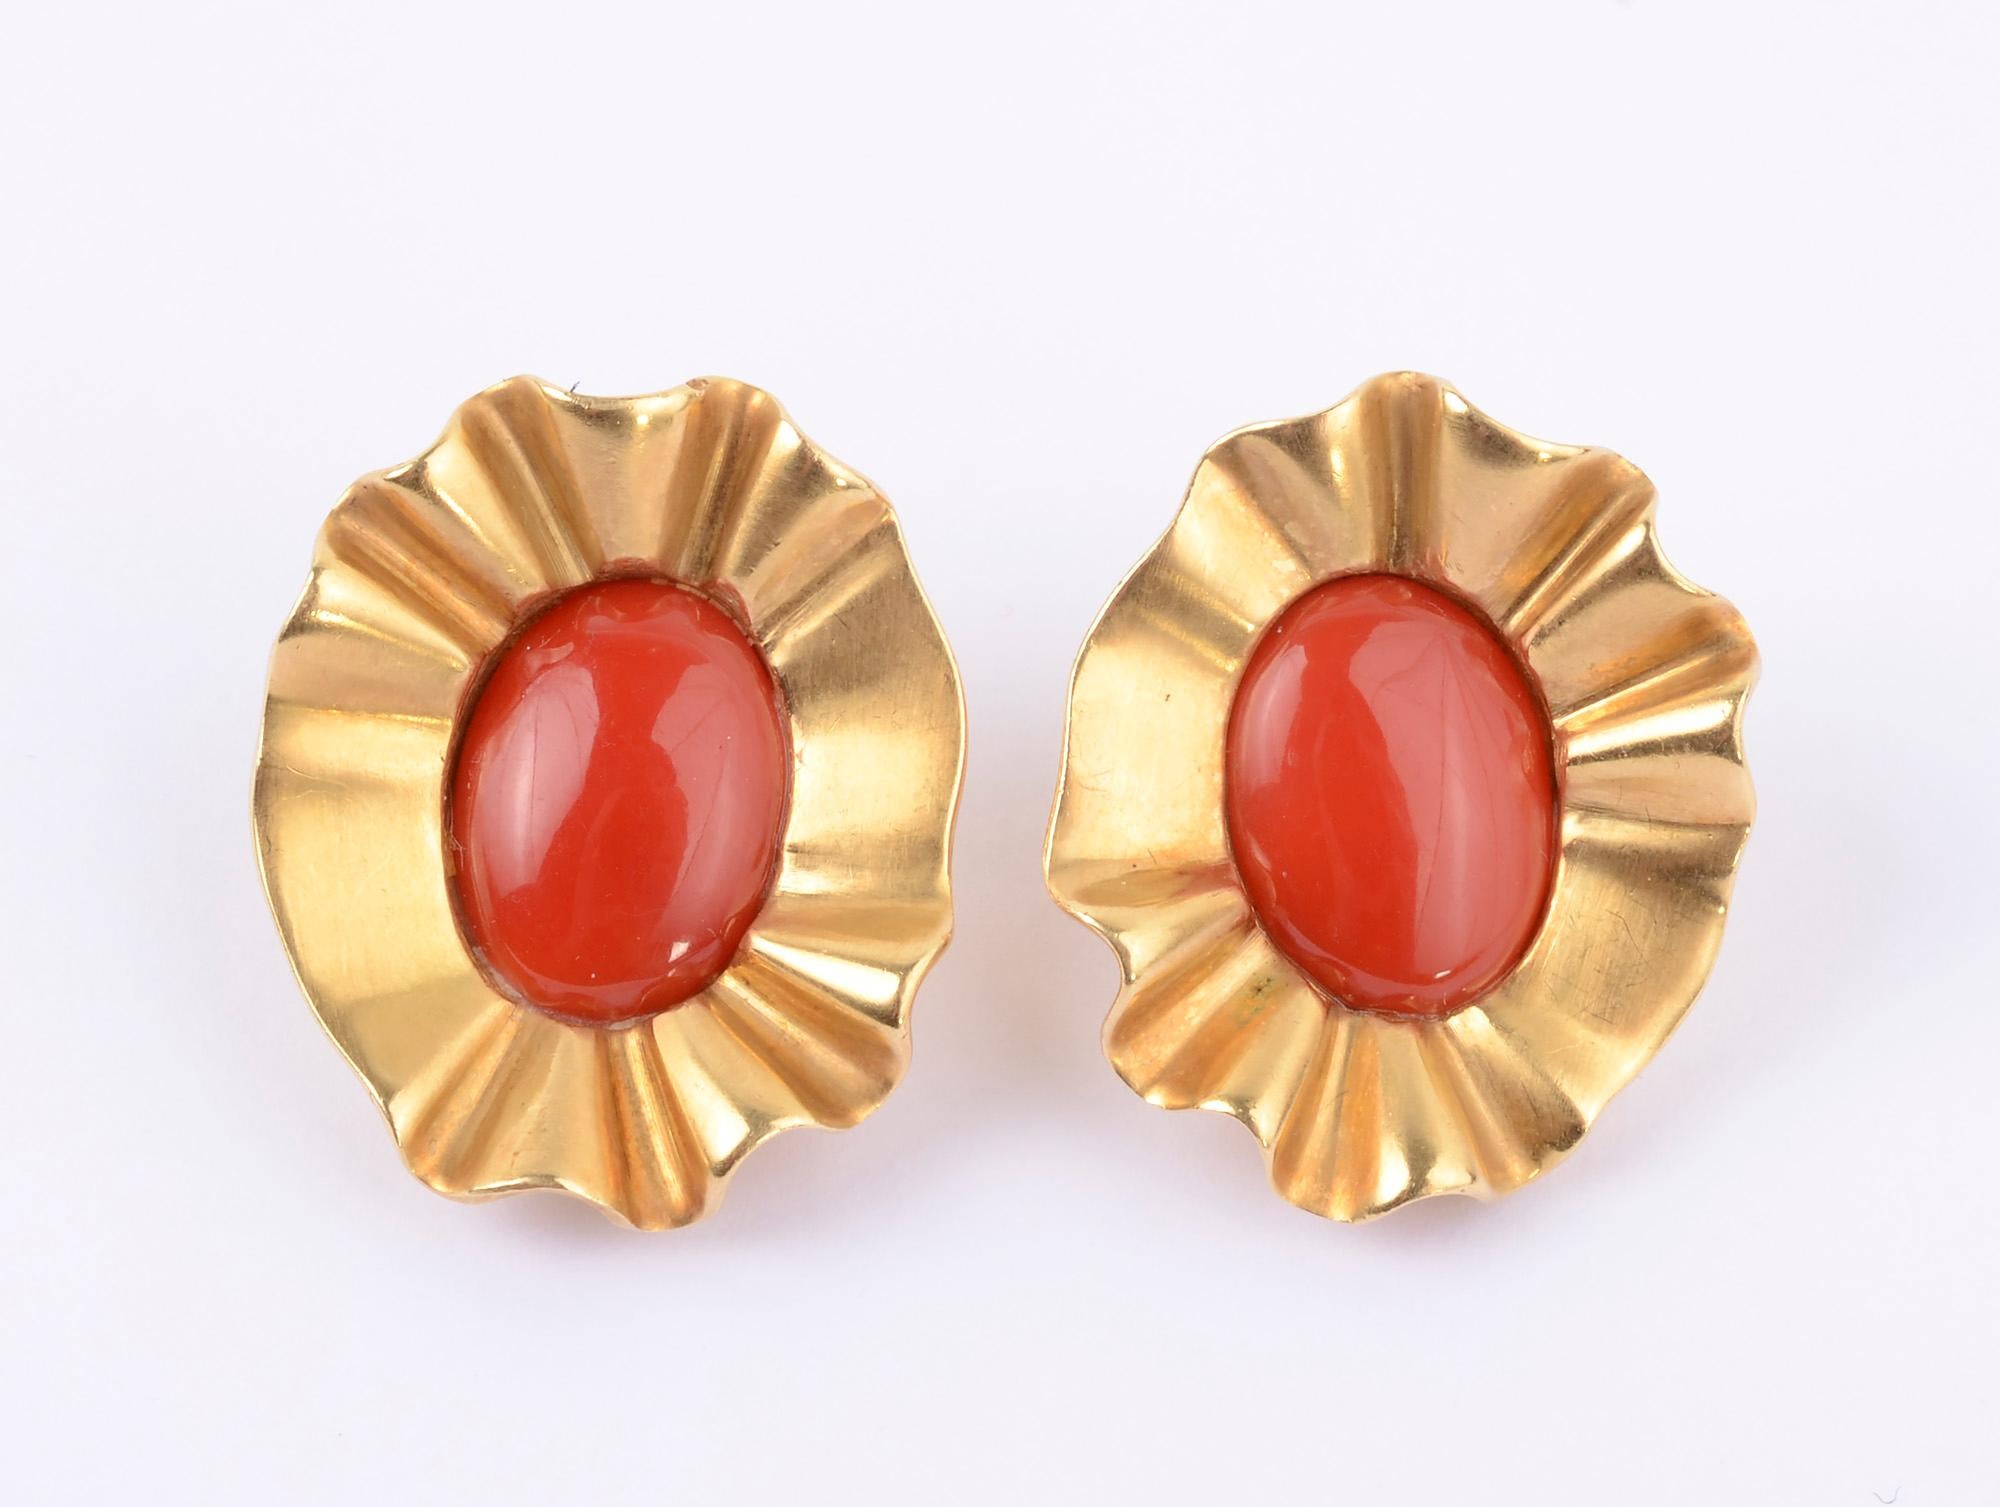 Large, bold ear clips by Angela Cummings. Richly colored coral stones are set in a ruffled 18 karat gold collar. Measurements are 1 inch x 1 1/4 inches. Clips backs can be converted to posts. Signed and dated 1988.
A white spot toward the bottom of